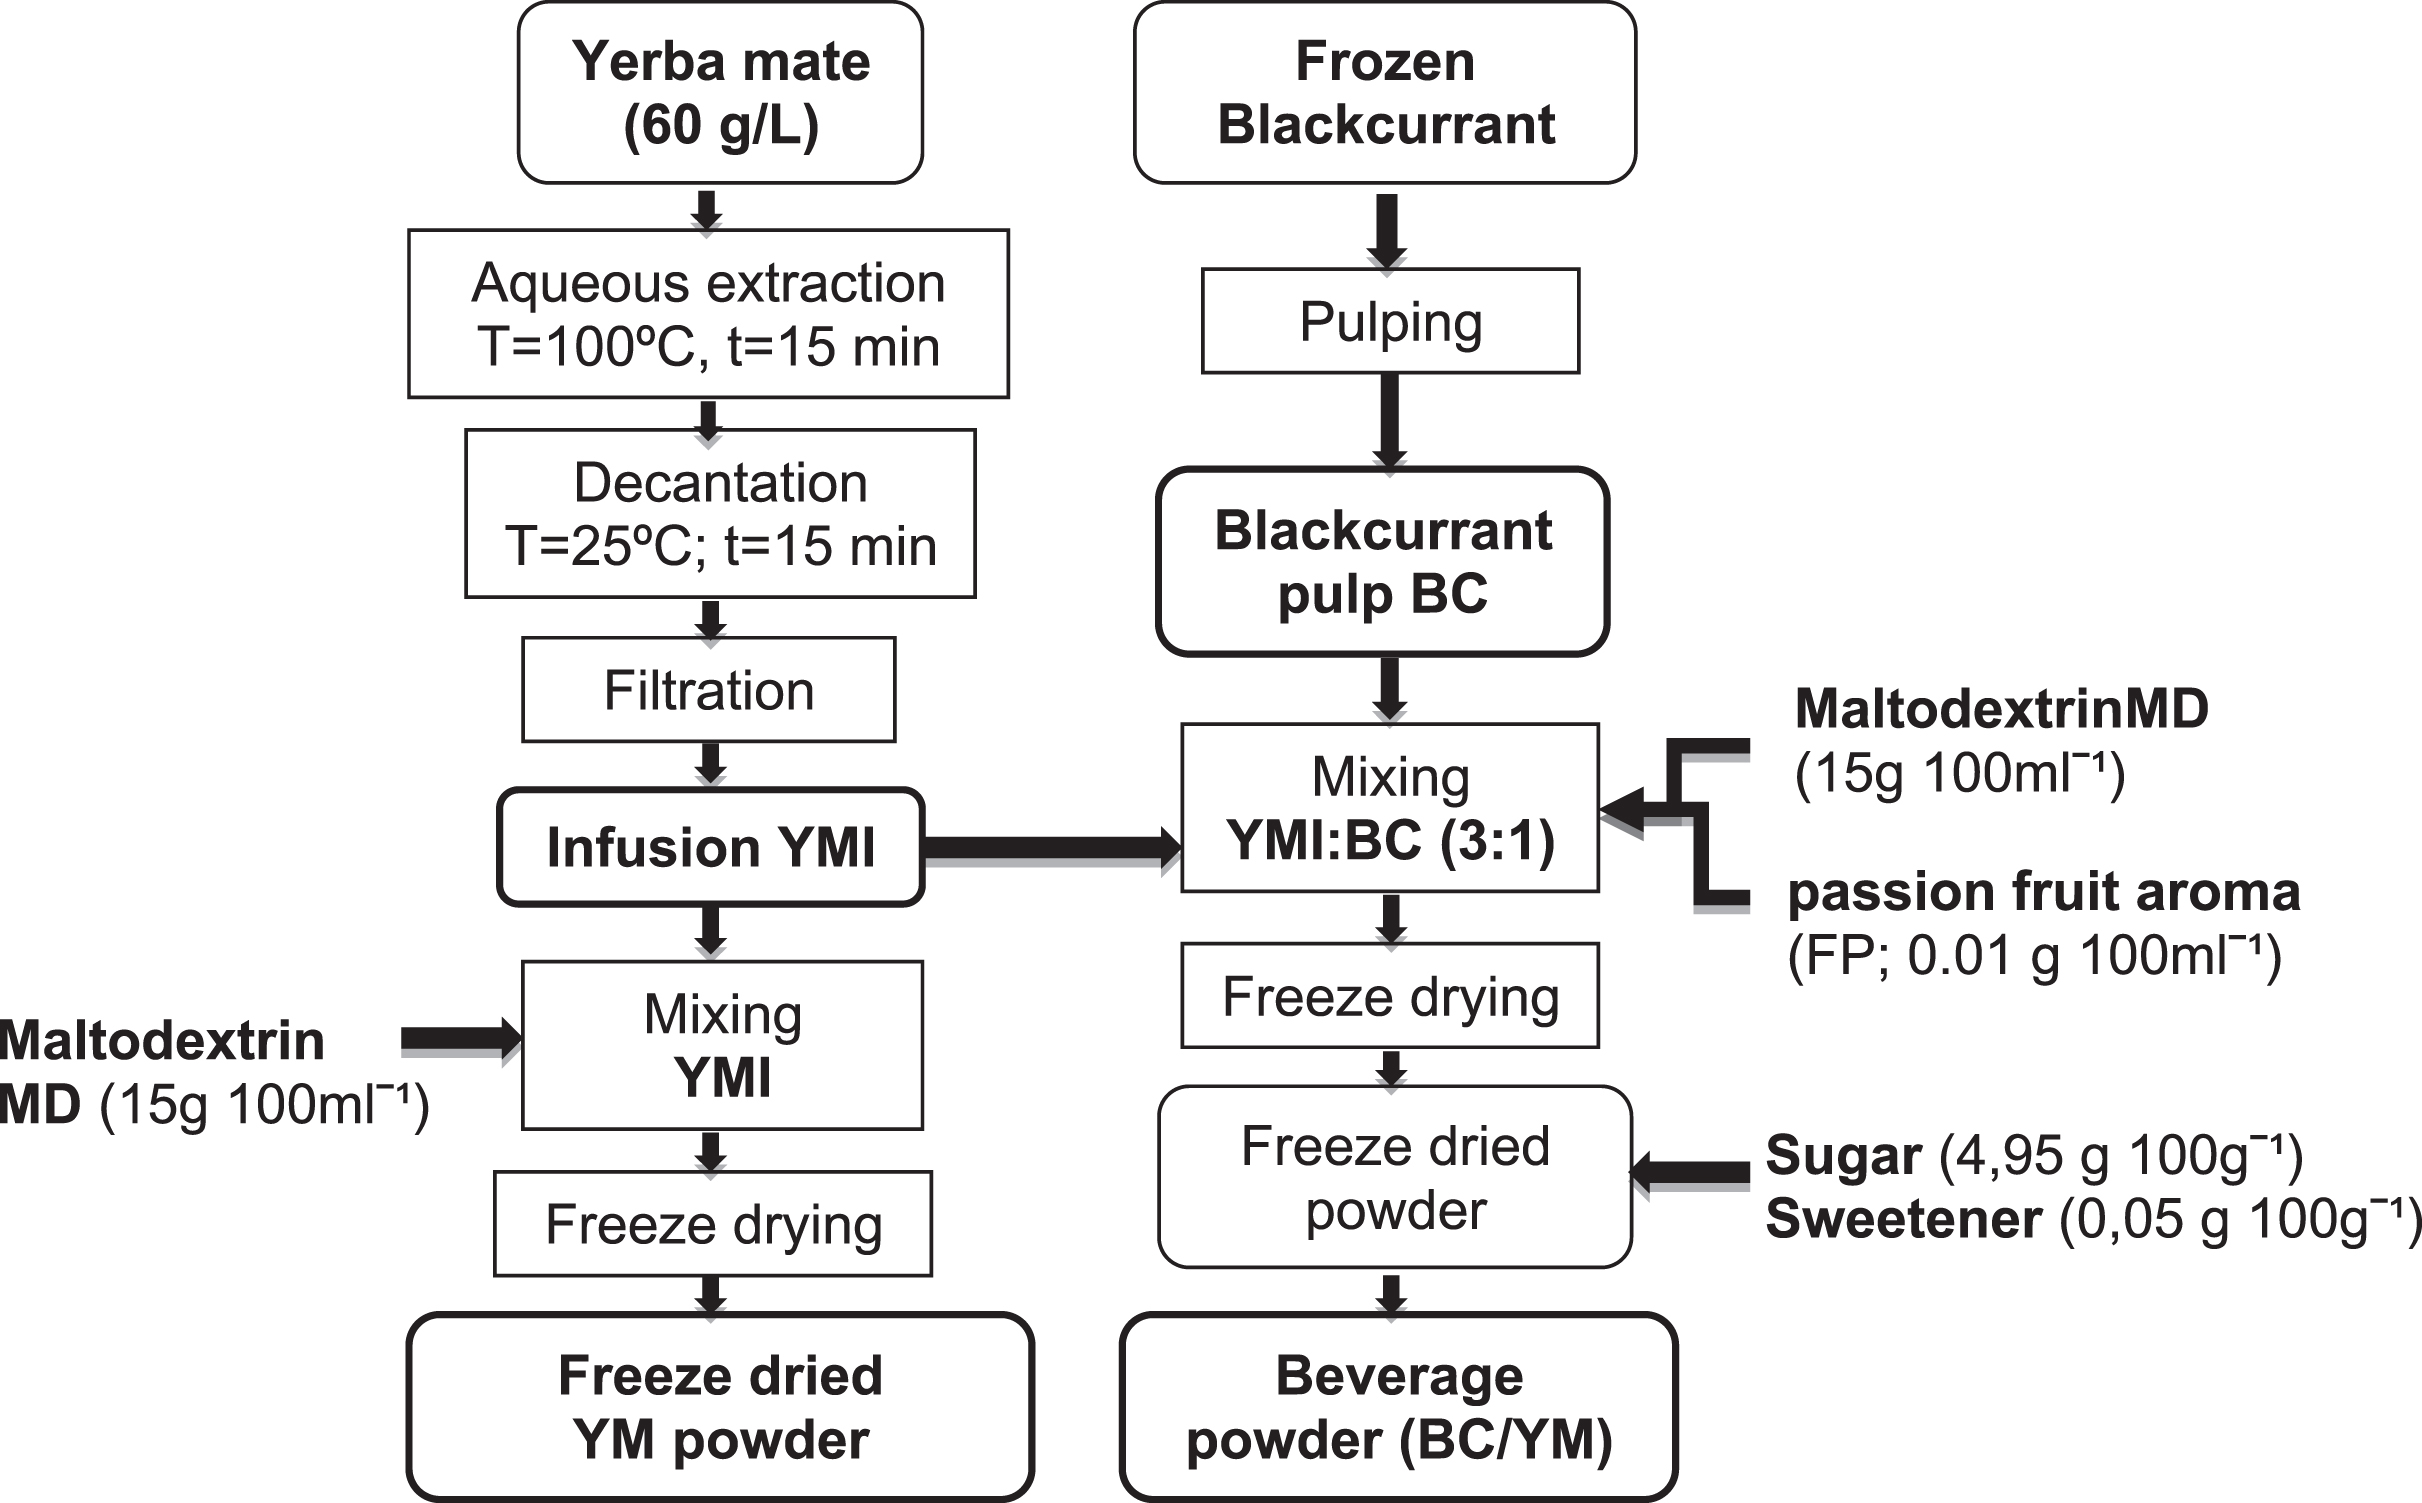 Process followed for preparing the freeze-dried YM and BC/YM drinks.